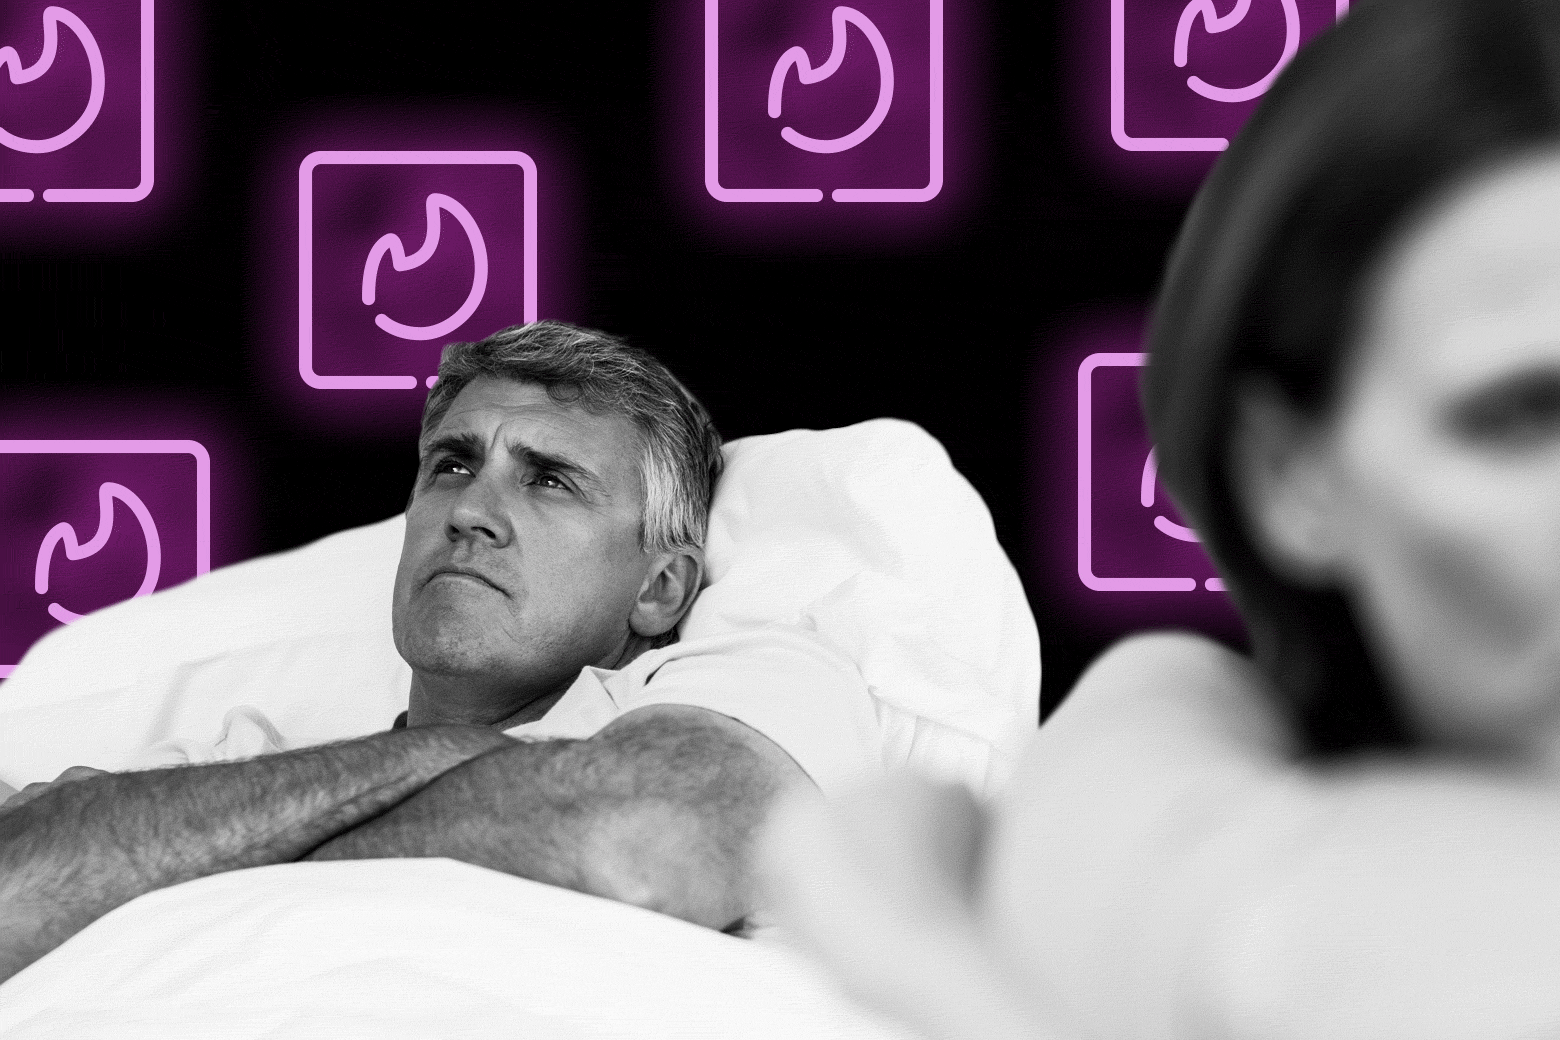 I discovered my girlfriend is a sex worker